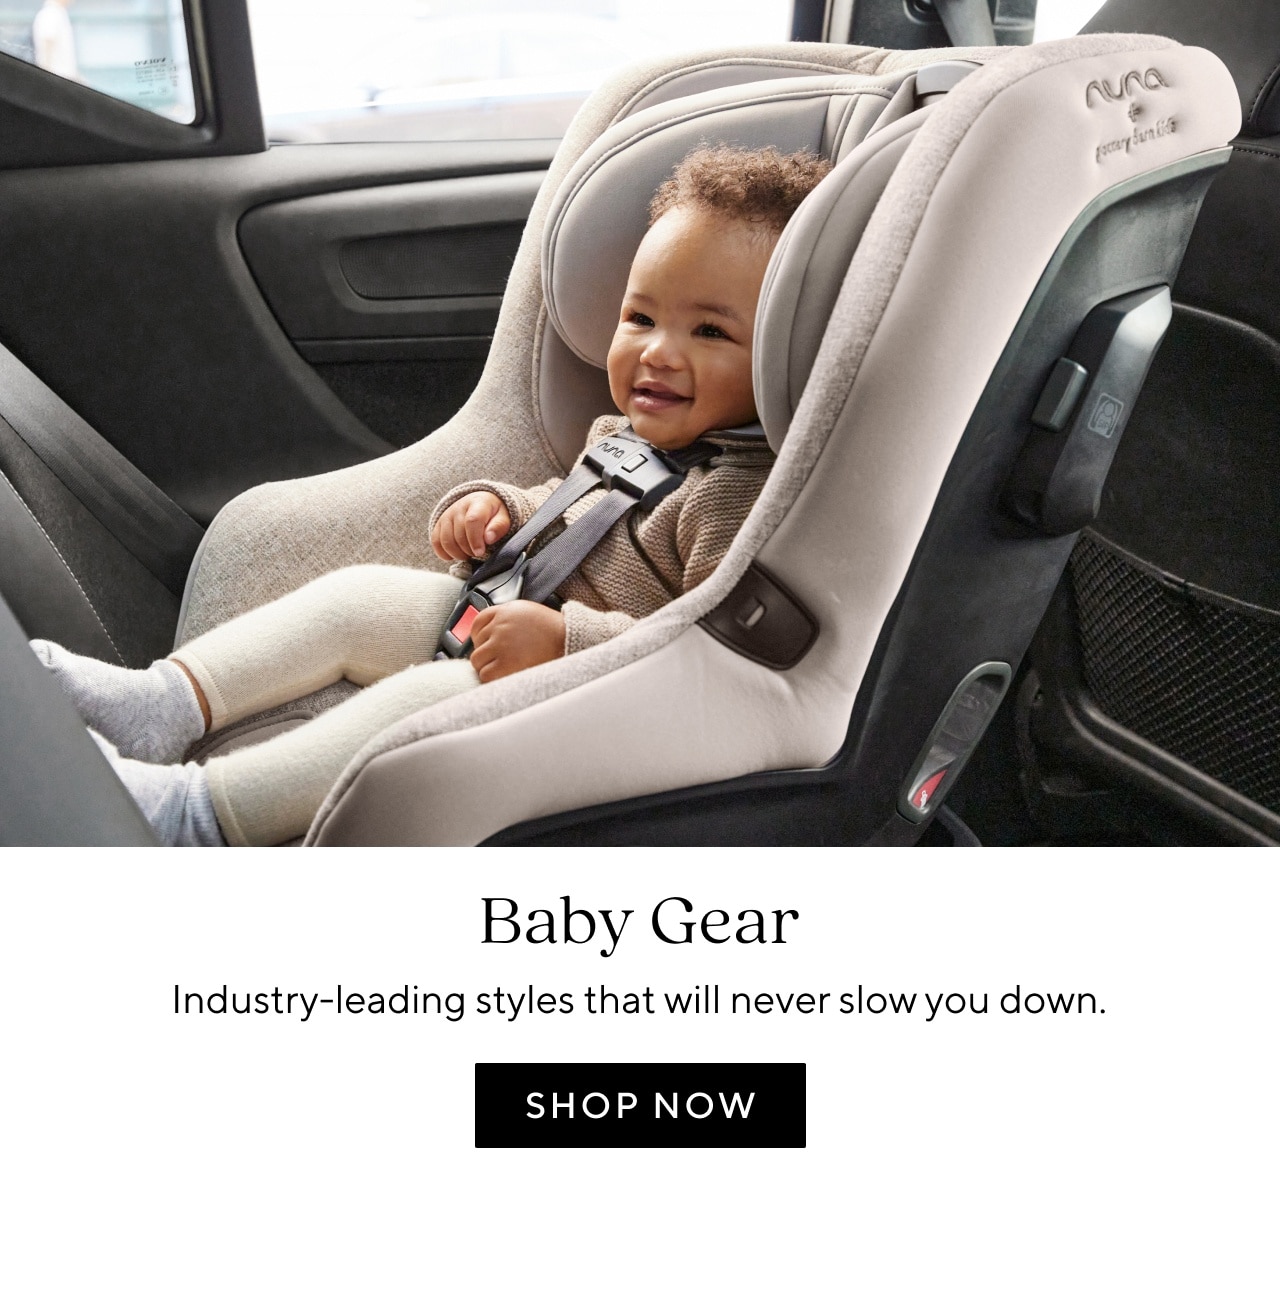 BABY GEAR - SHOP NOW